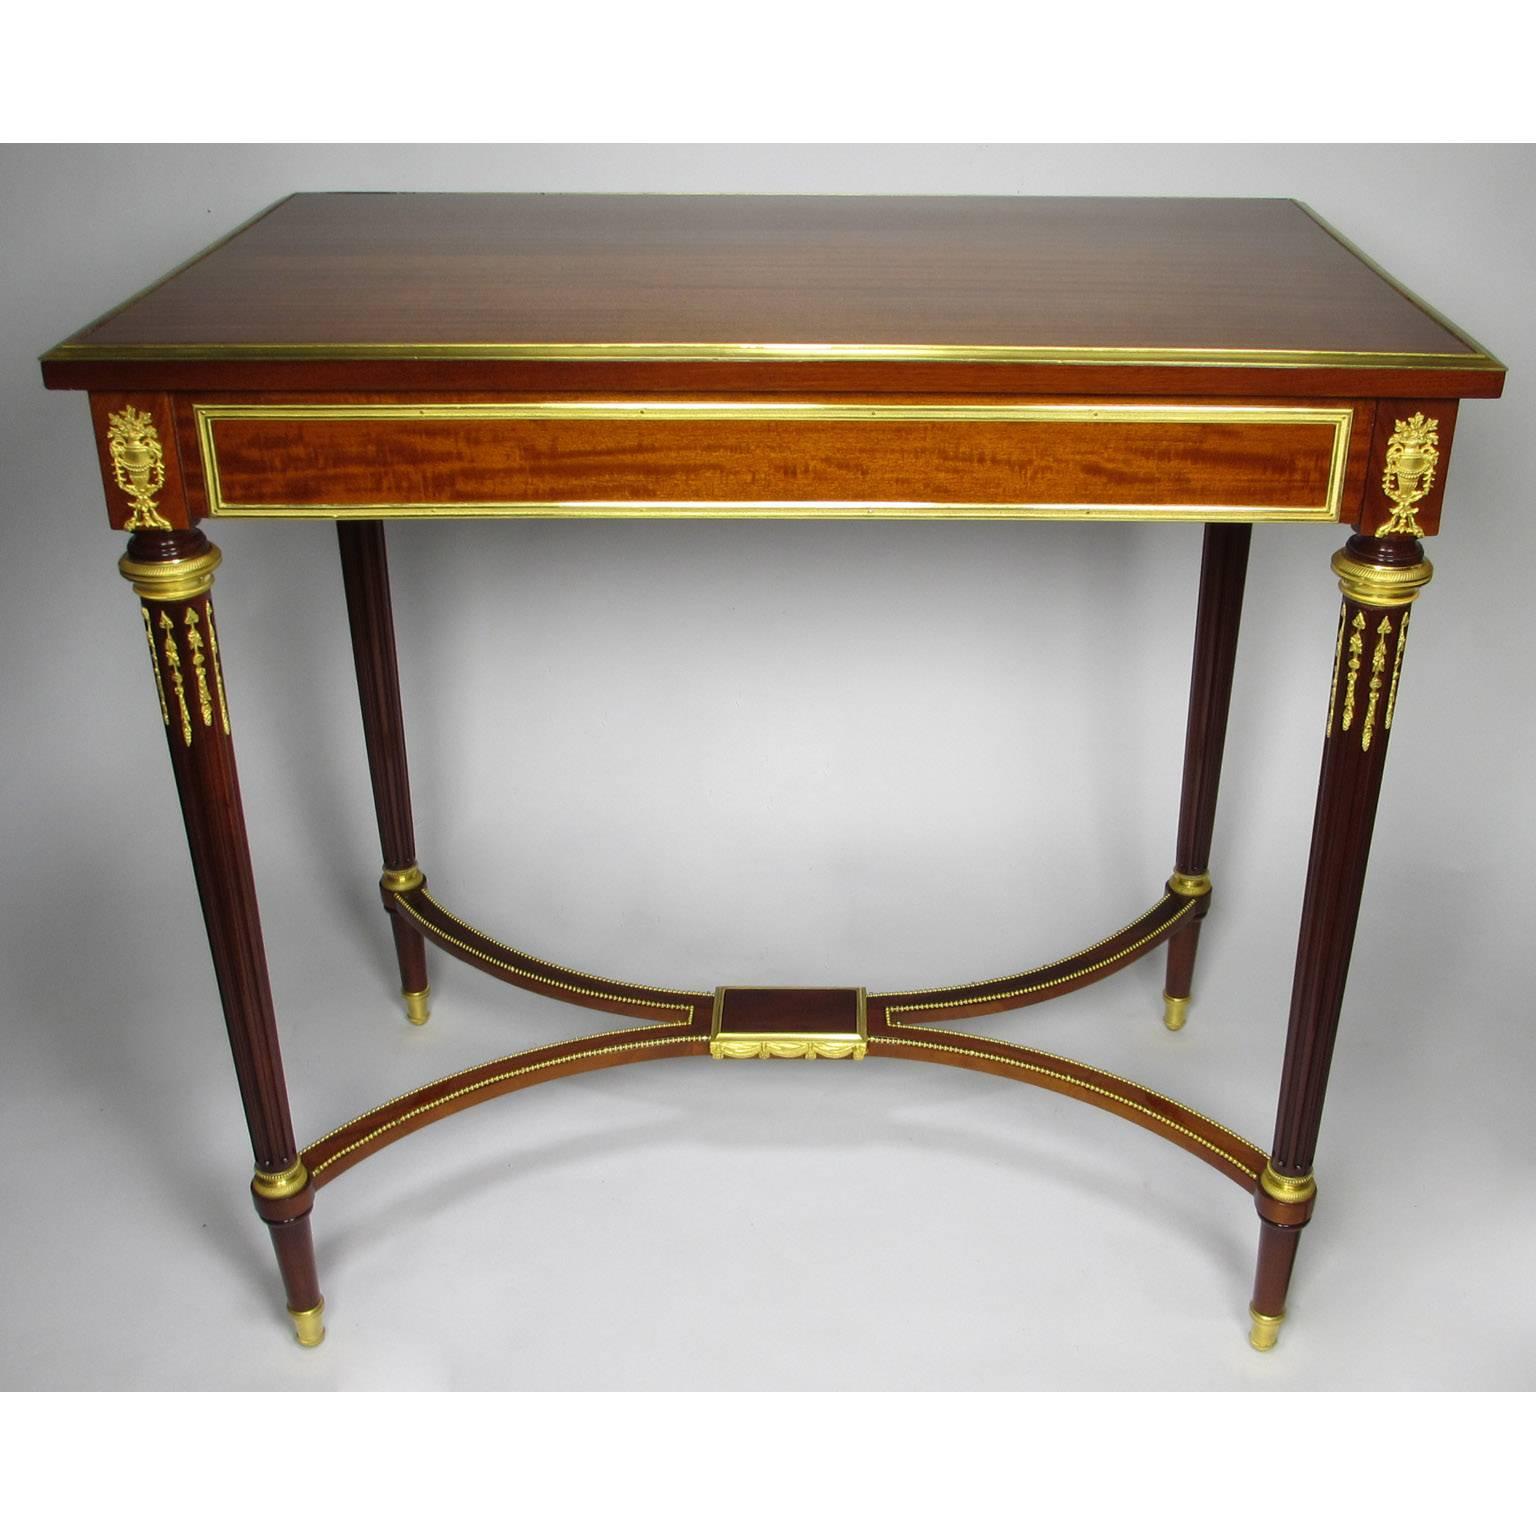 Fine French 19th Century Louis XVI Style Mahogany and Ormolu-Mounted Side Table For Sale 5